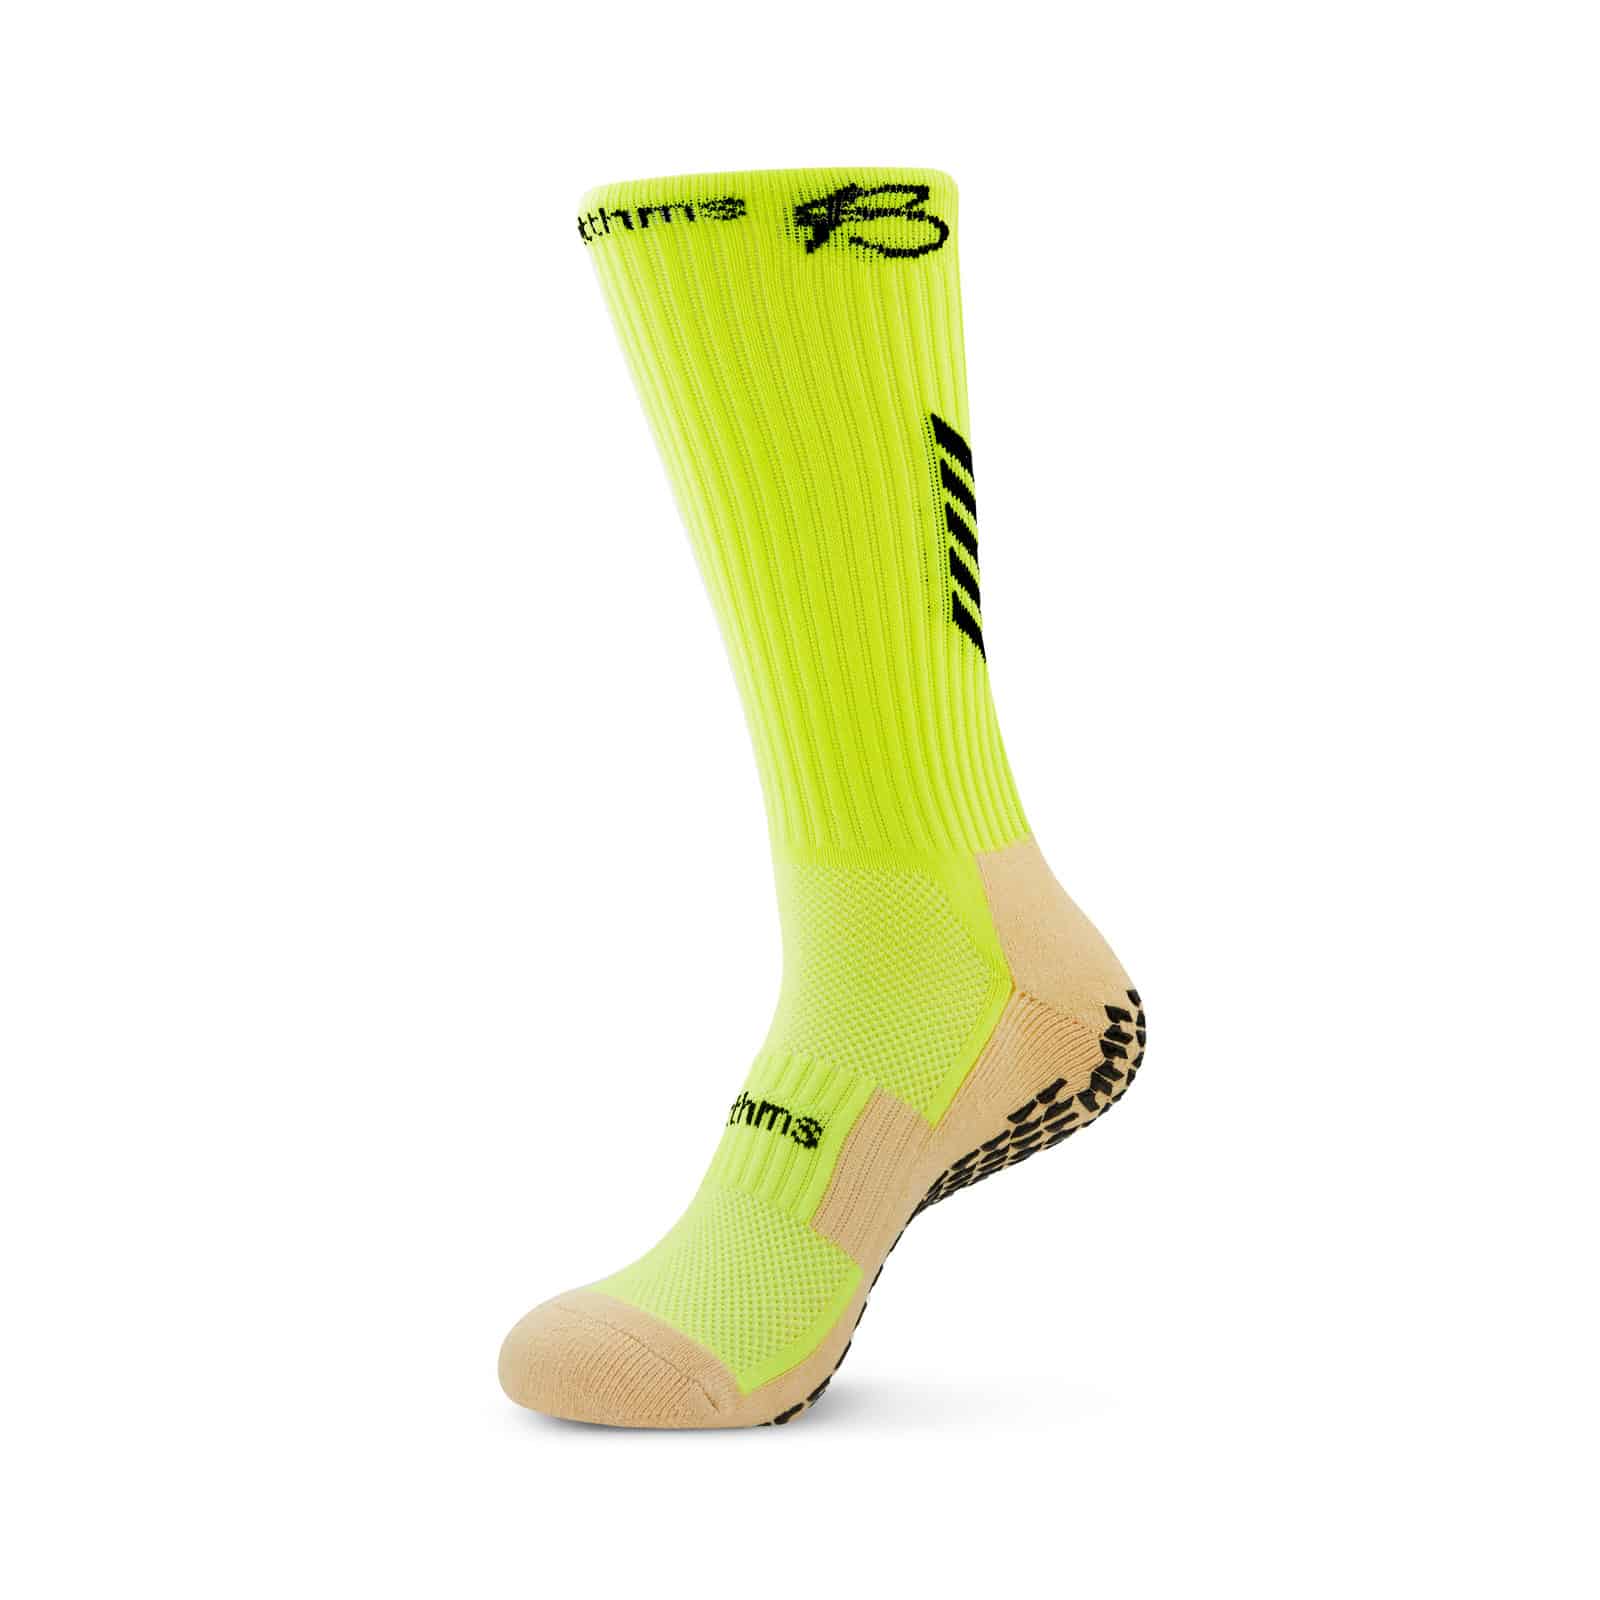 products/BTTHMS_TECH_SOCK3069_Yellow.jpgproducts/BTTHMS_TECH_SOCK3062_Yellow.jpgproducts/BTTHMS_TECH_SOCK3070_Yellow.jpgproducts/BTTHMS_TECH_SOCK3069_Detail_Yellow.jpgproducts/BTTHMS_TECH_SOCK3062_Detail_Yellow.jpg